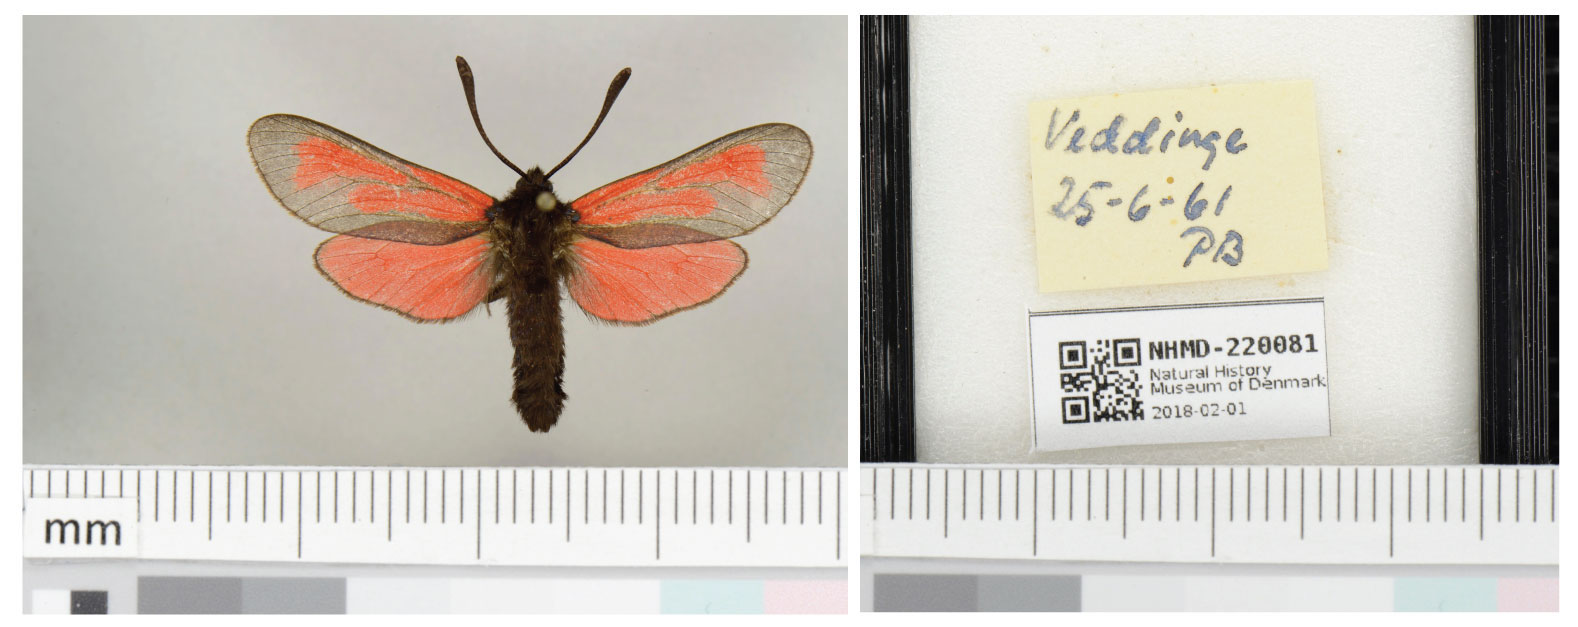 Zygenidae moth (right ) and label (left). Captured at a digitization facility at Sertifer in Joensuu, Finland. Copyright CCBY4.0. <br> Rights holder is the University of Copenhagen